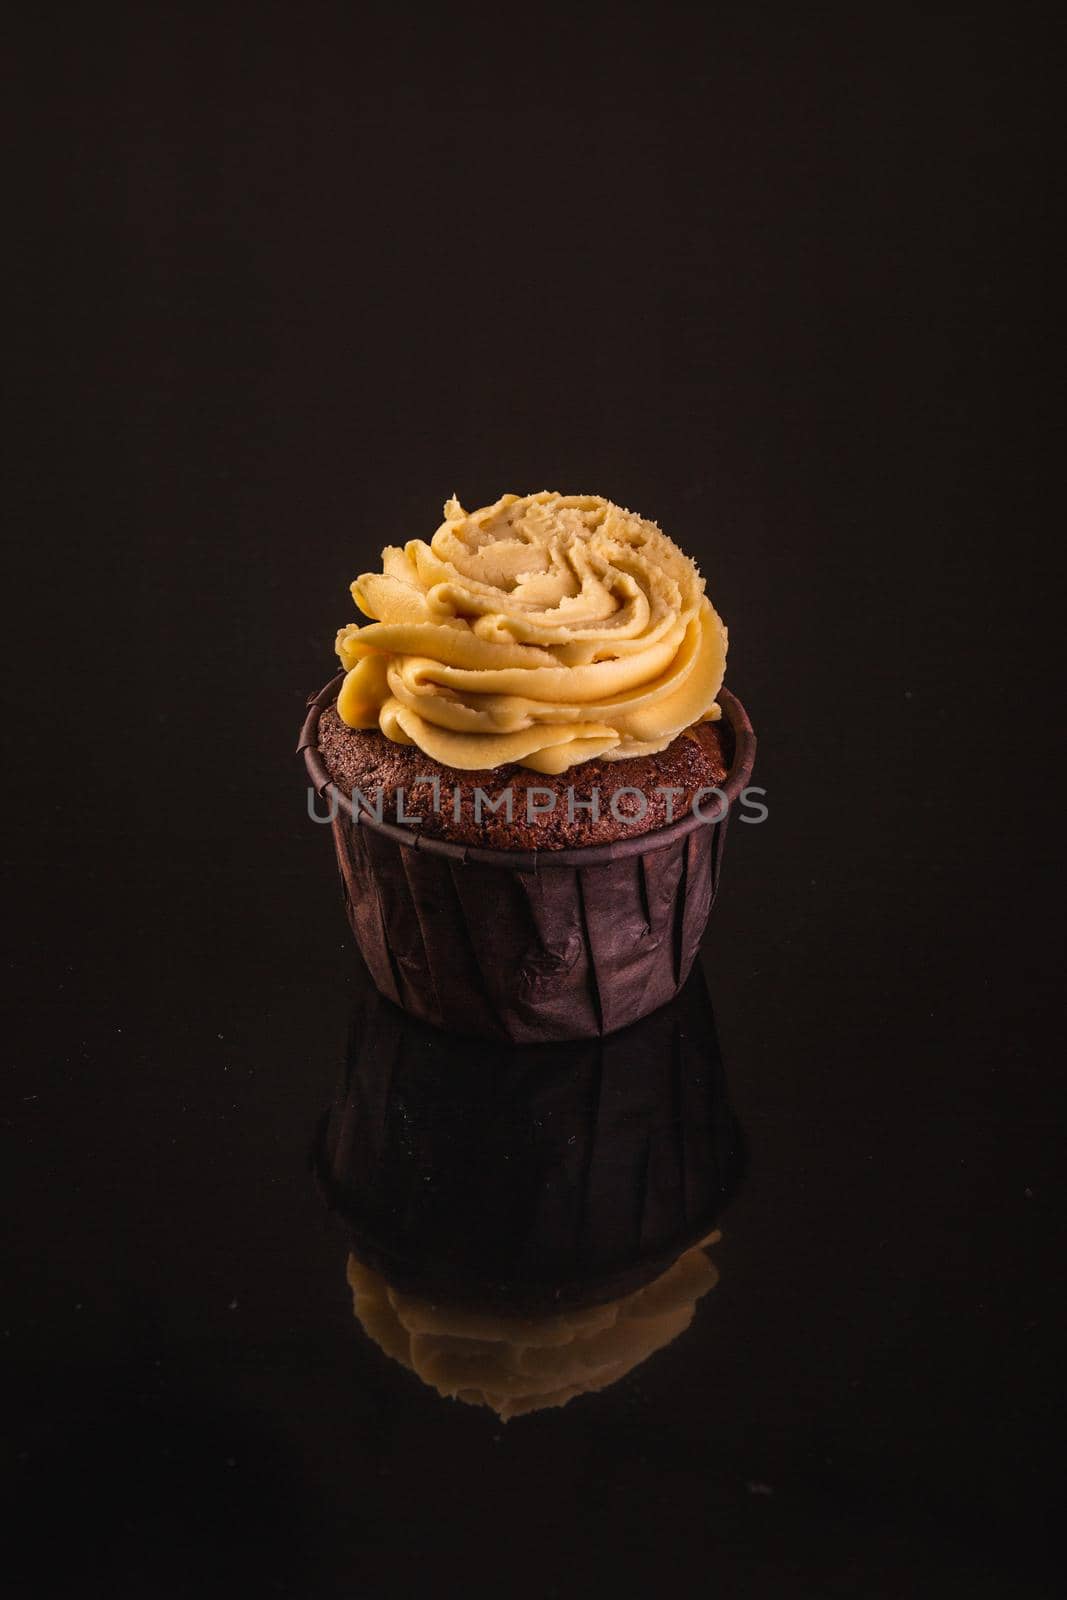 Peanut Butter Cupcake On A Black Background With Reflection.